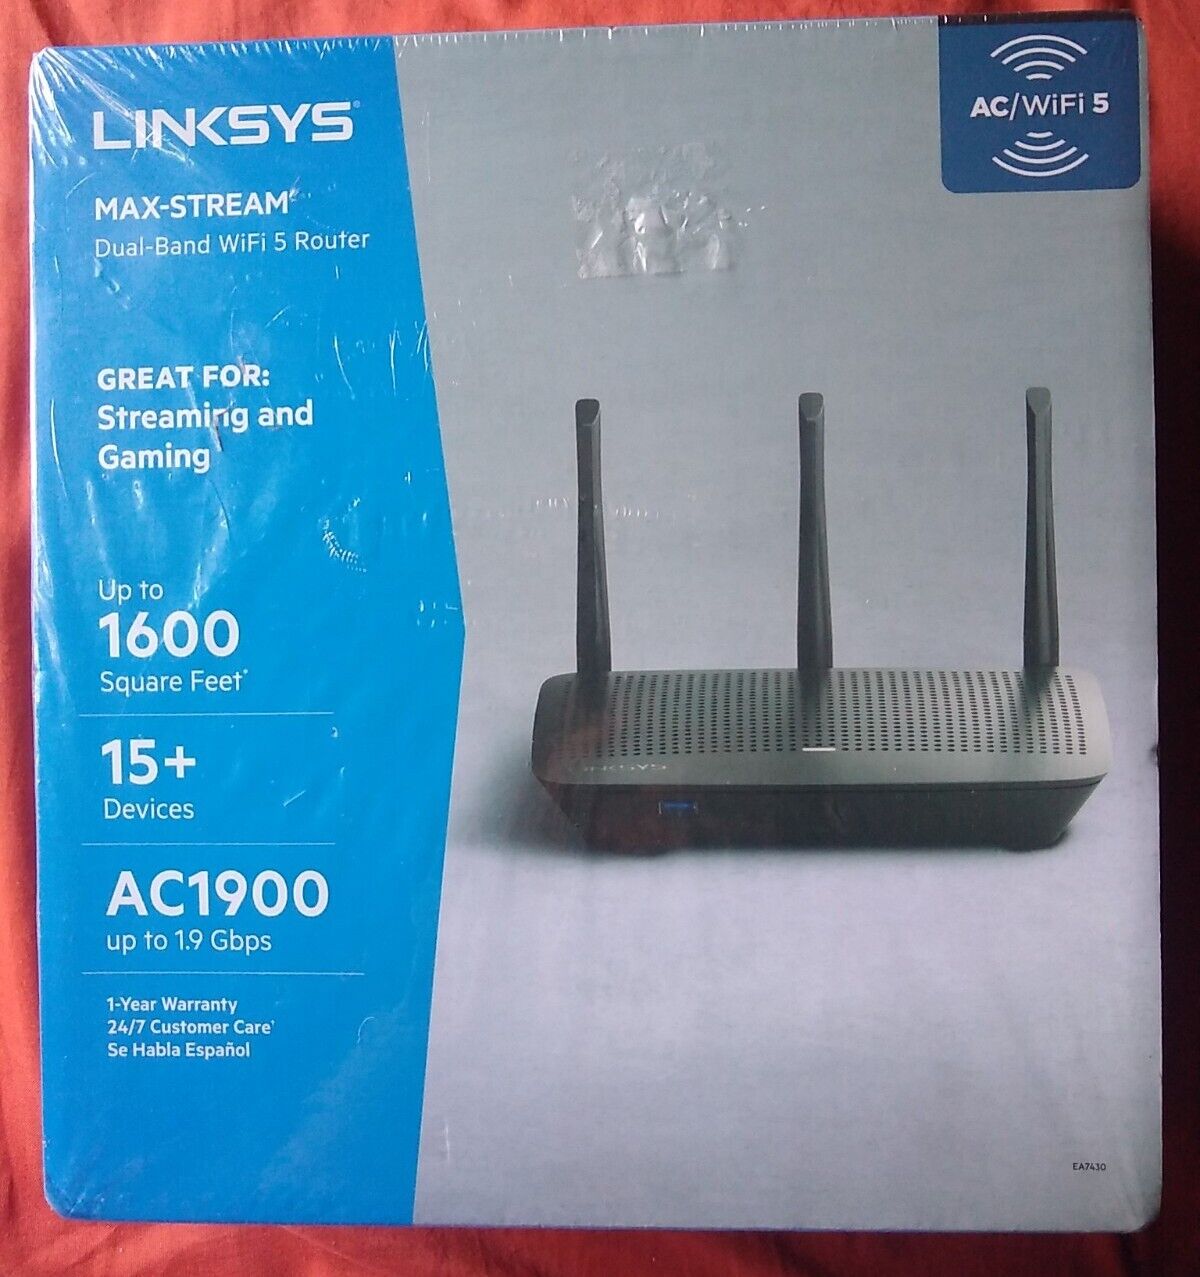 Linksys AC1900 (EA7430) -  WiFi 5 Wireless Router Max-Stream Dual-Band...NEW